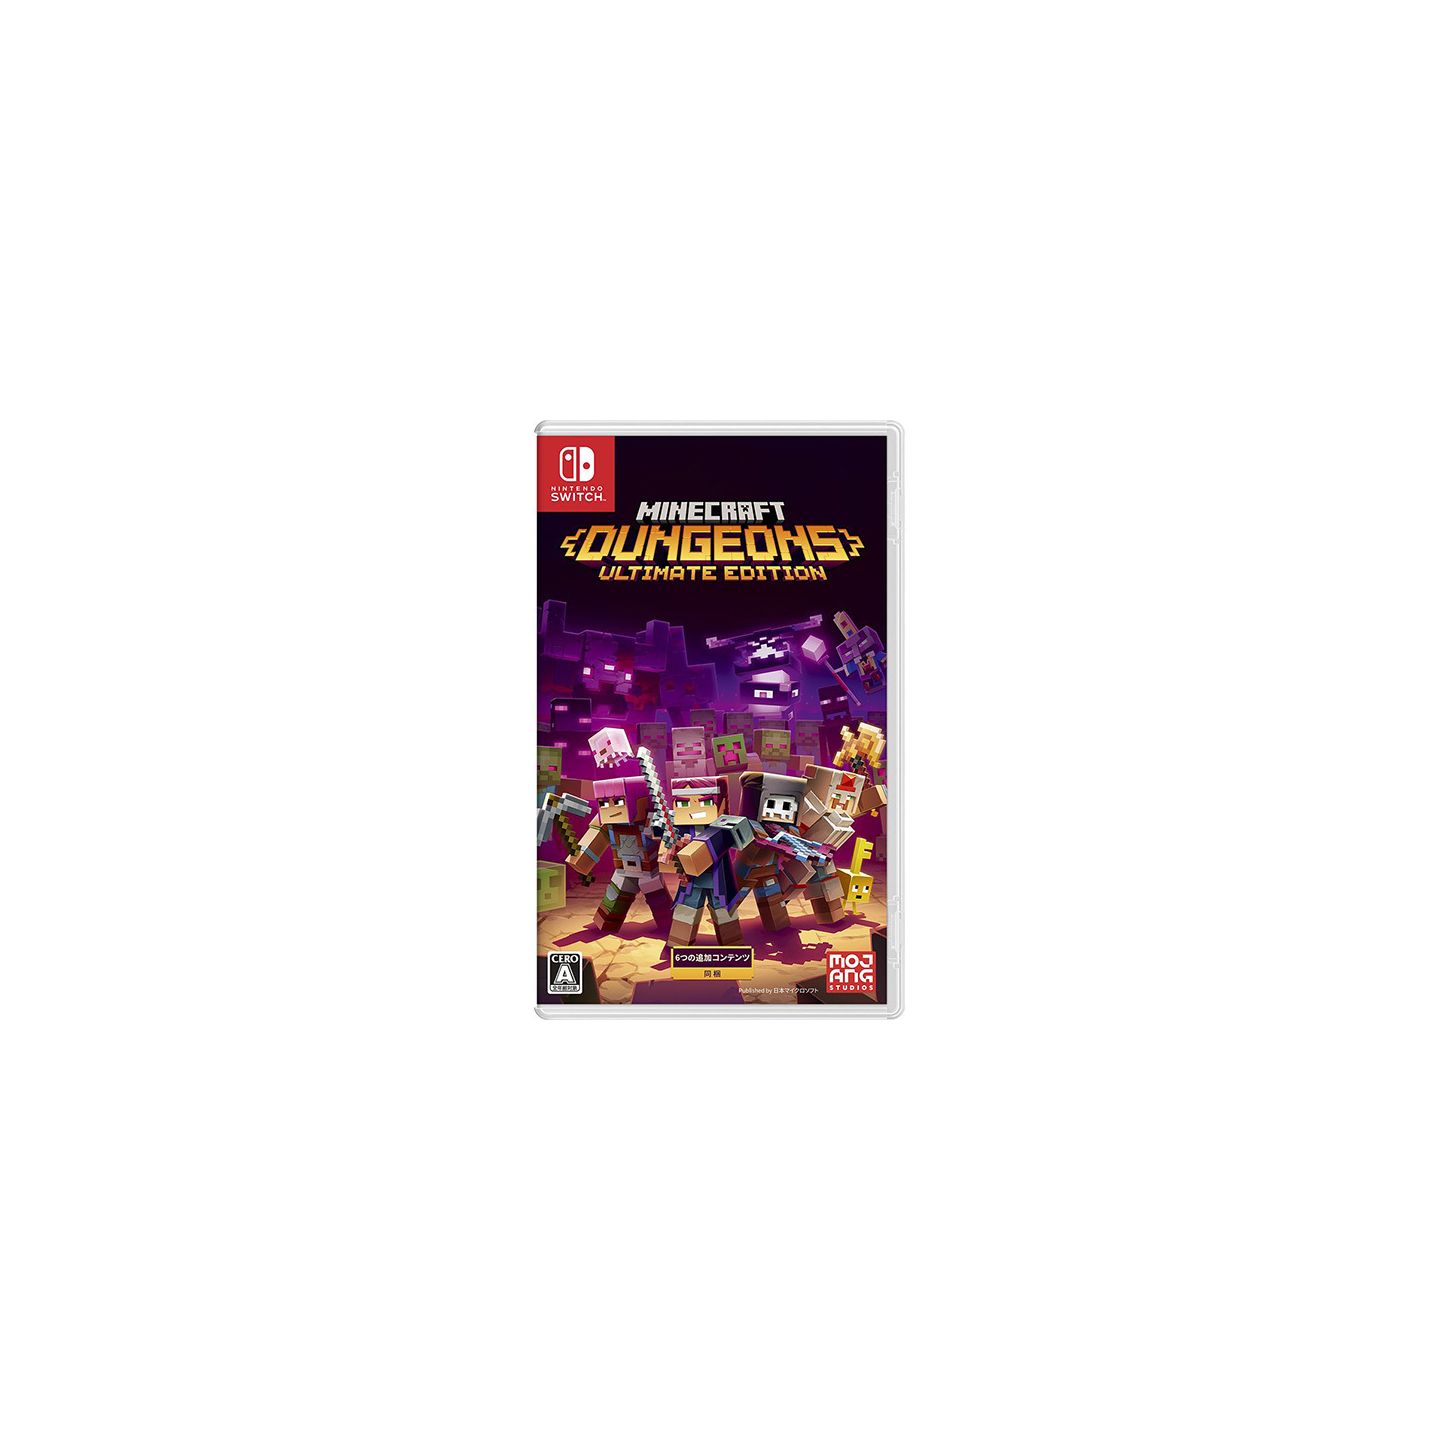 Microsoft - Minecraft Dungeons Ultimate Edition for Nintendo Switch